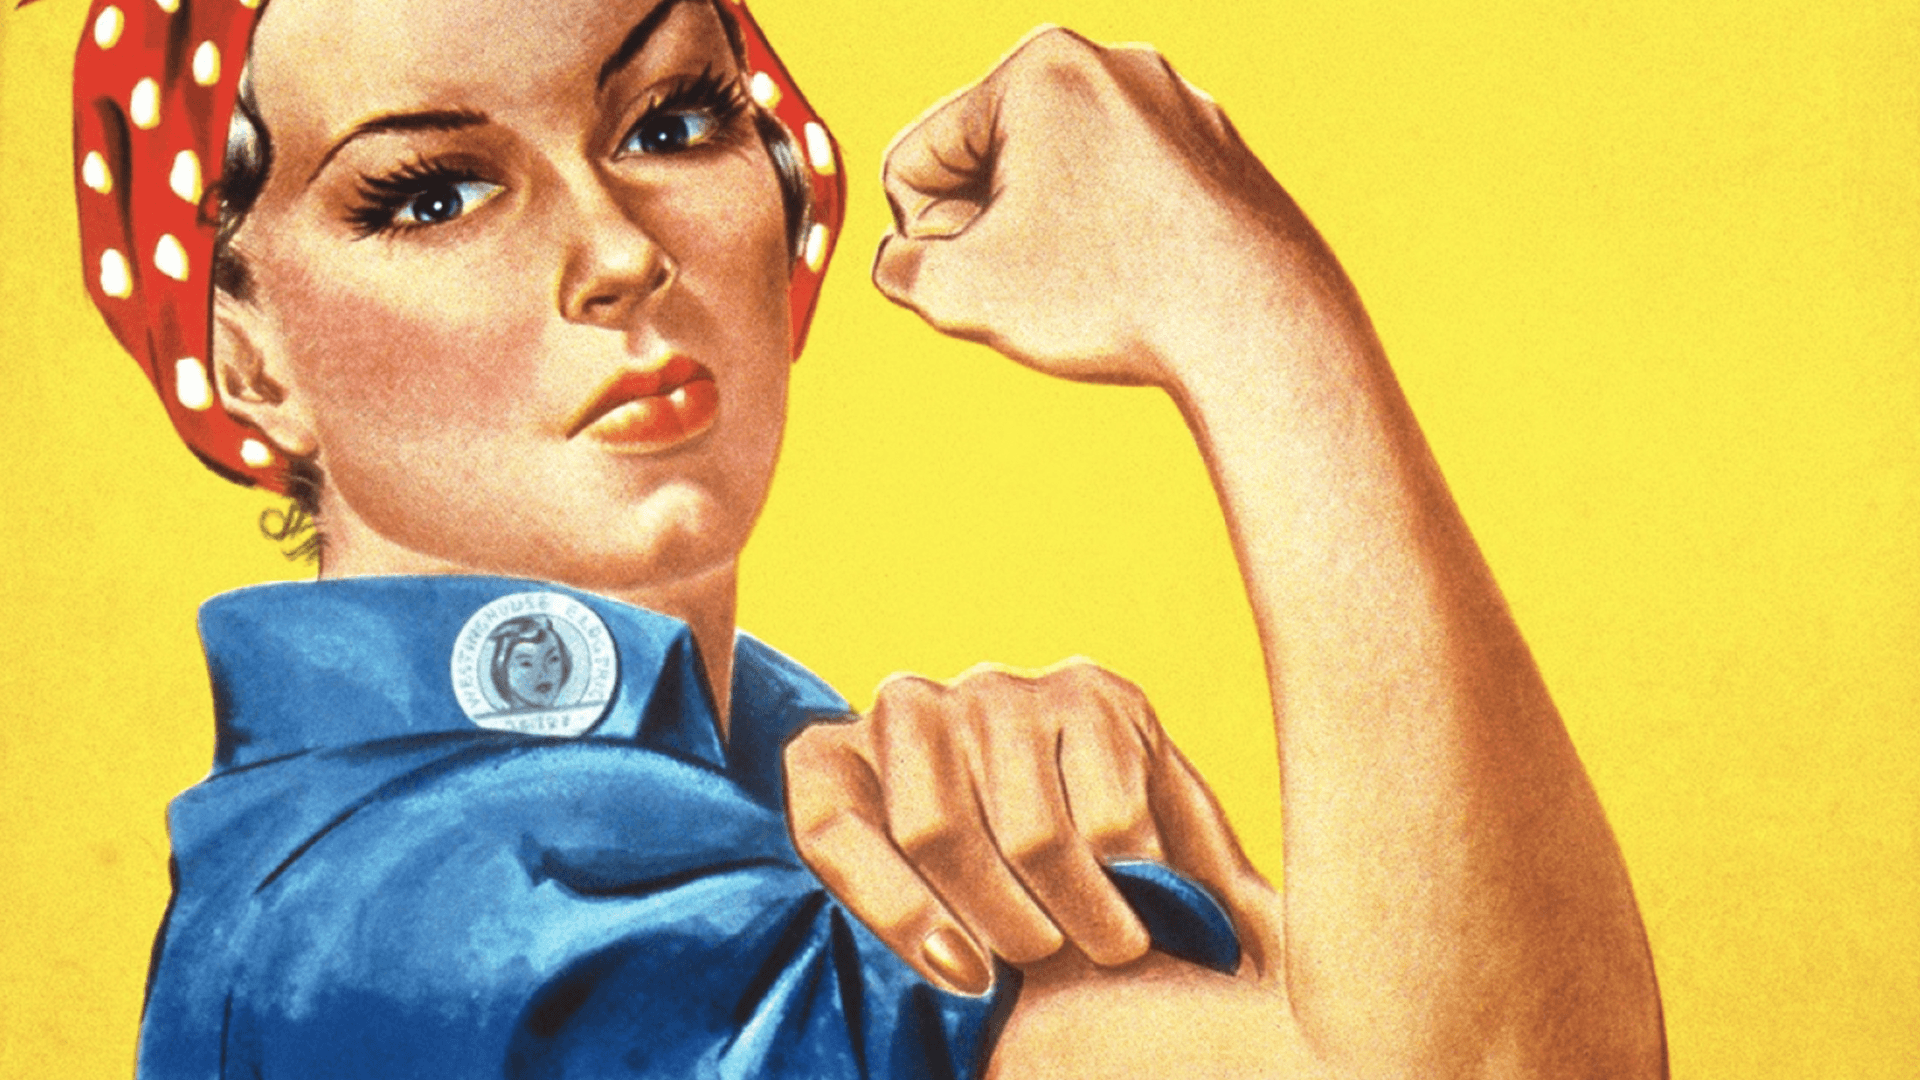 Watch: Rosie the Riveter is a feminist icon, but she didn't start